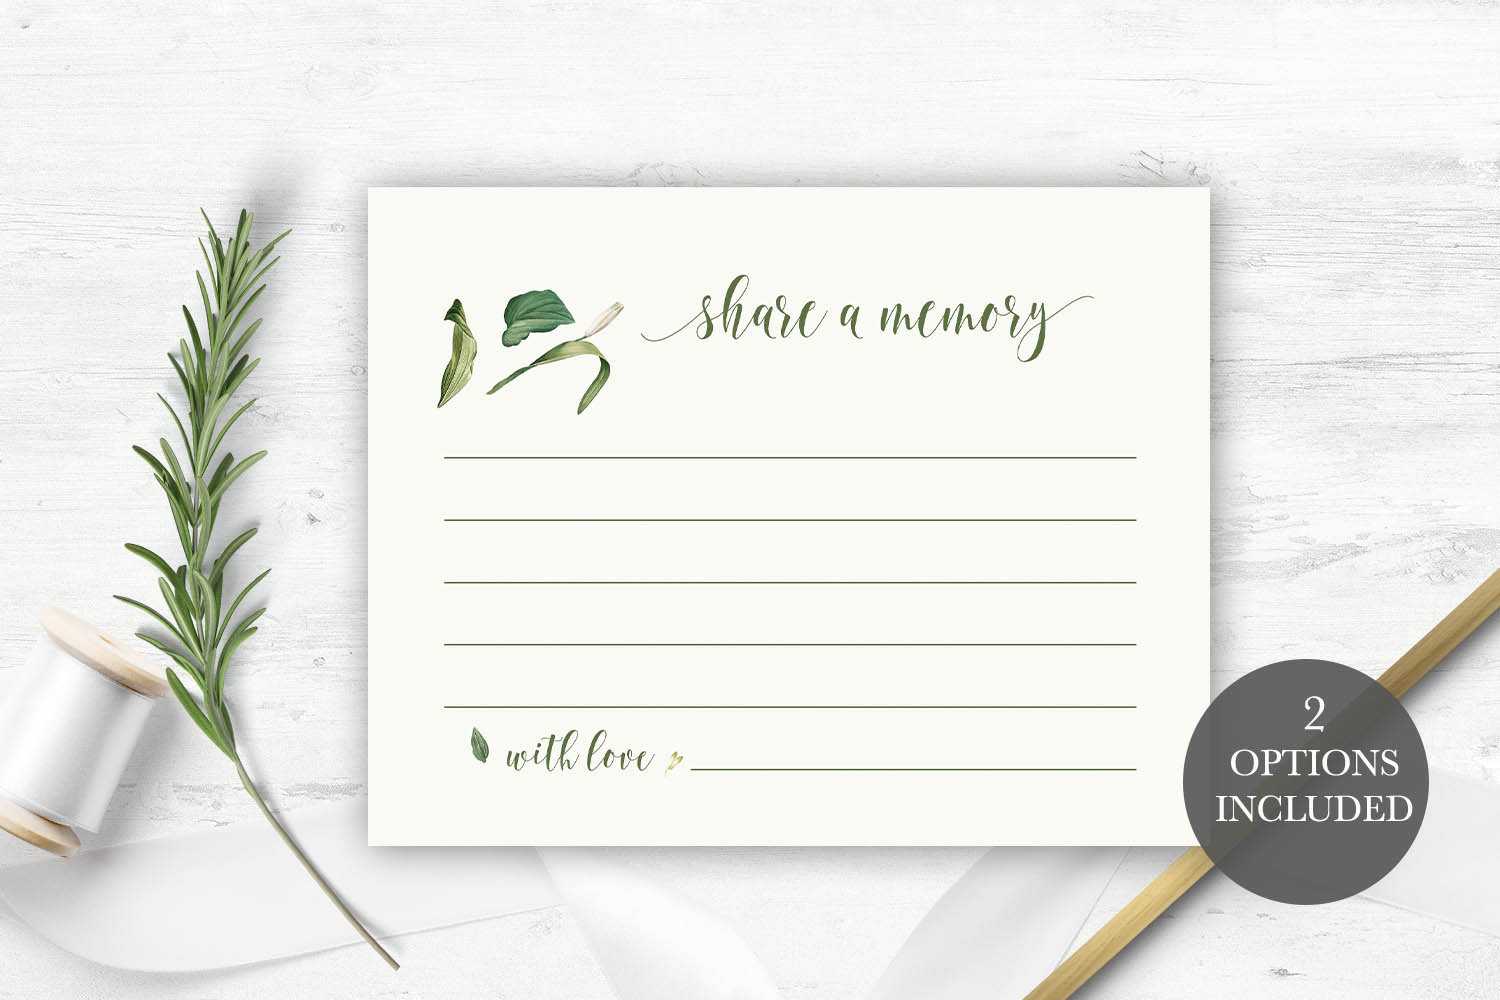 Funeral Share A Memory Card | Printable Funeral Memory Card | Greenery  Memorial Card Template | Funeral Cards | Memorial Cards Template Inside In Memory Cards Templates